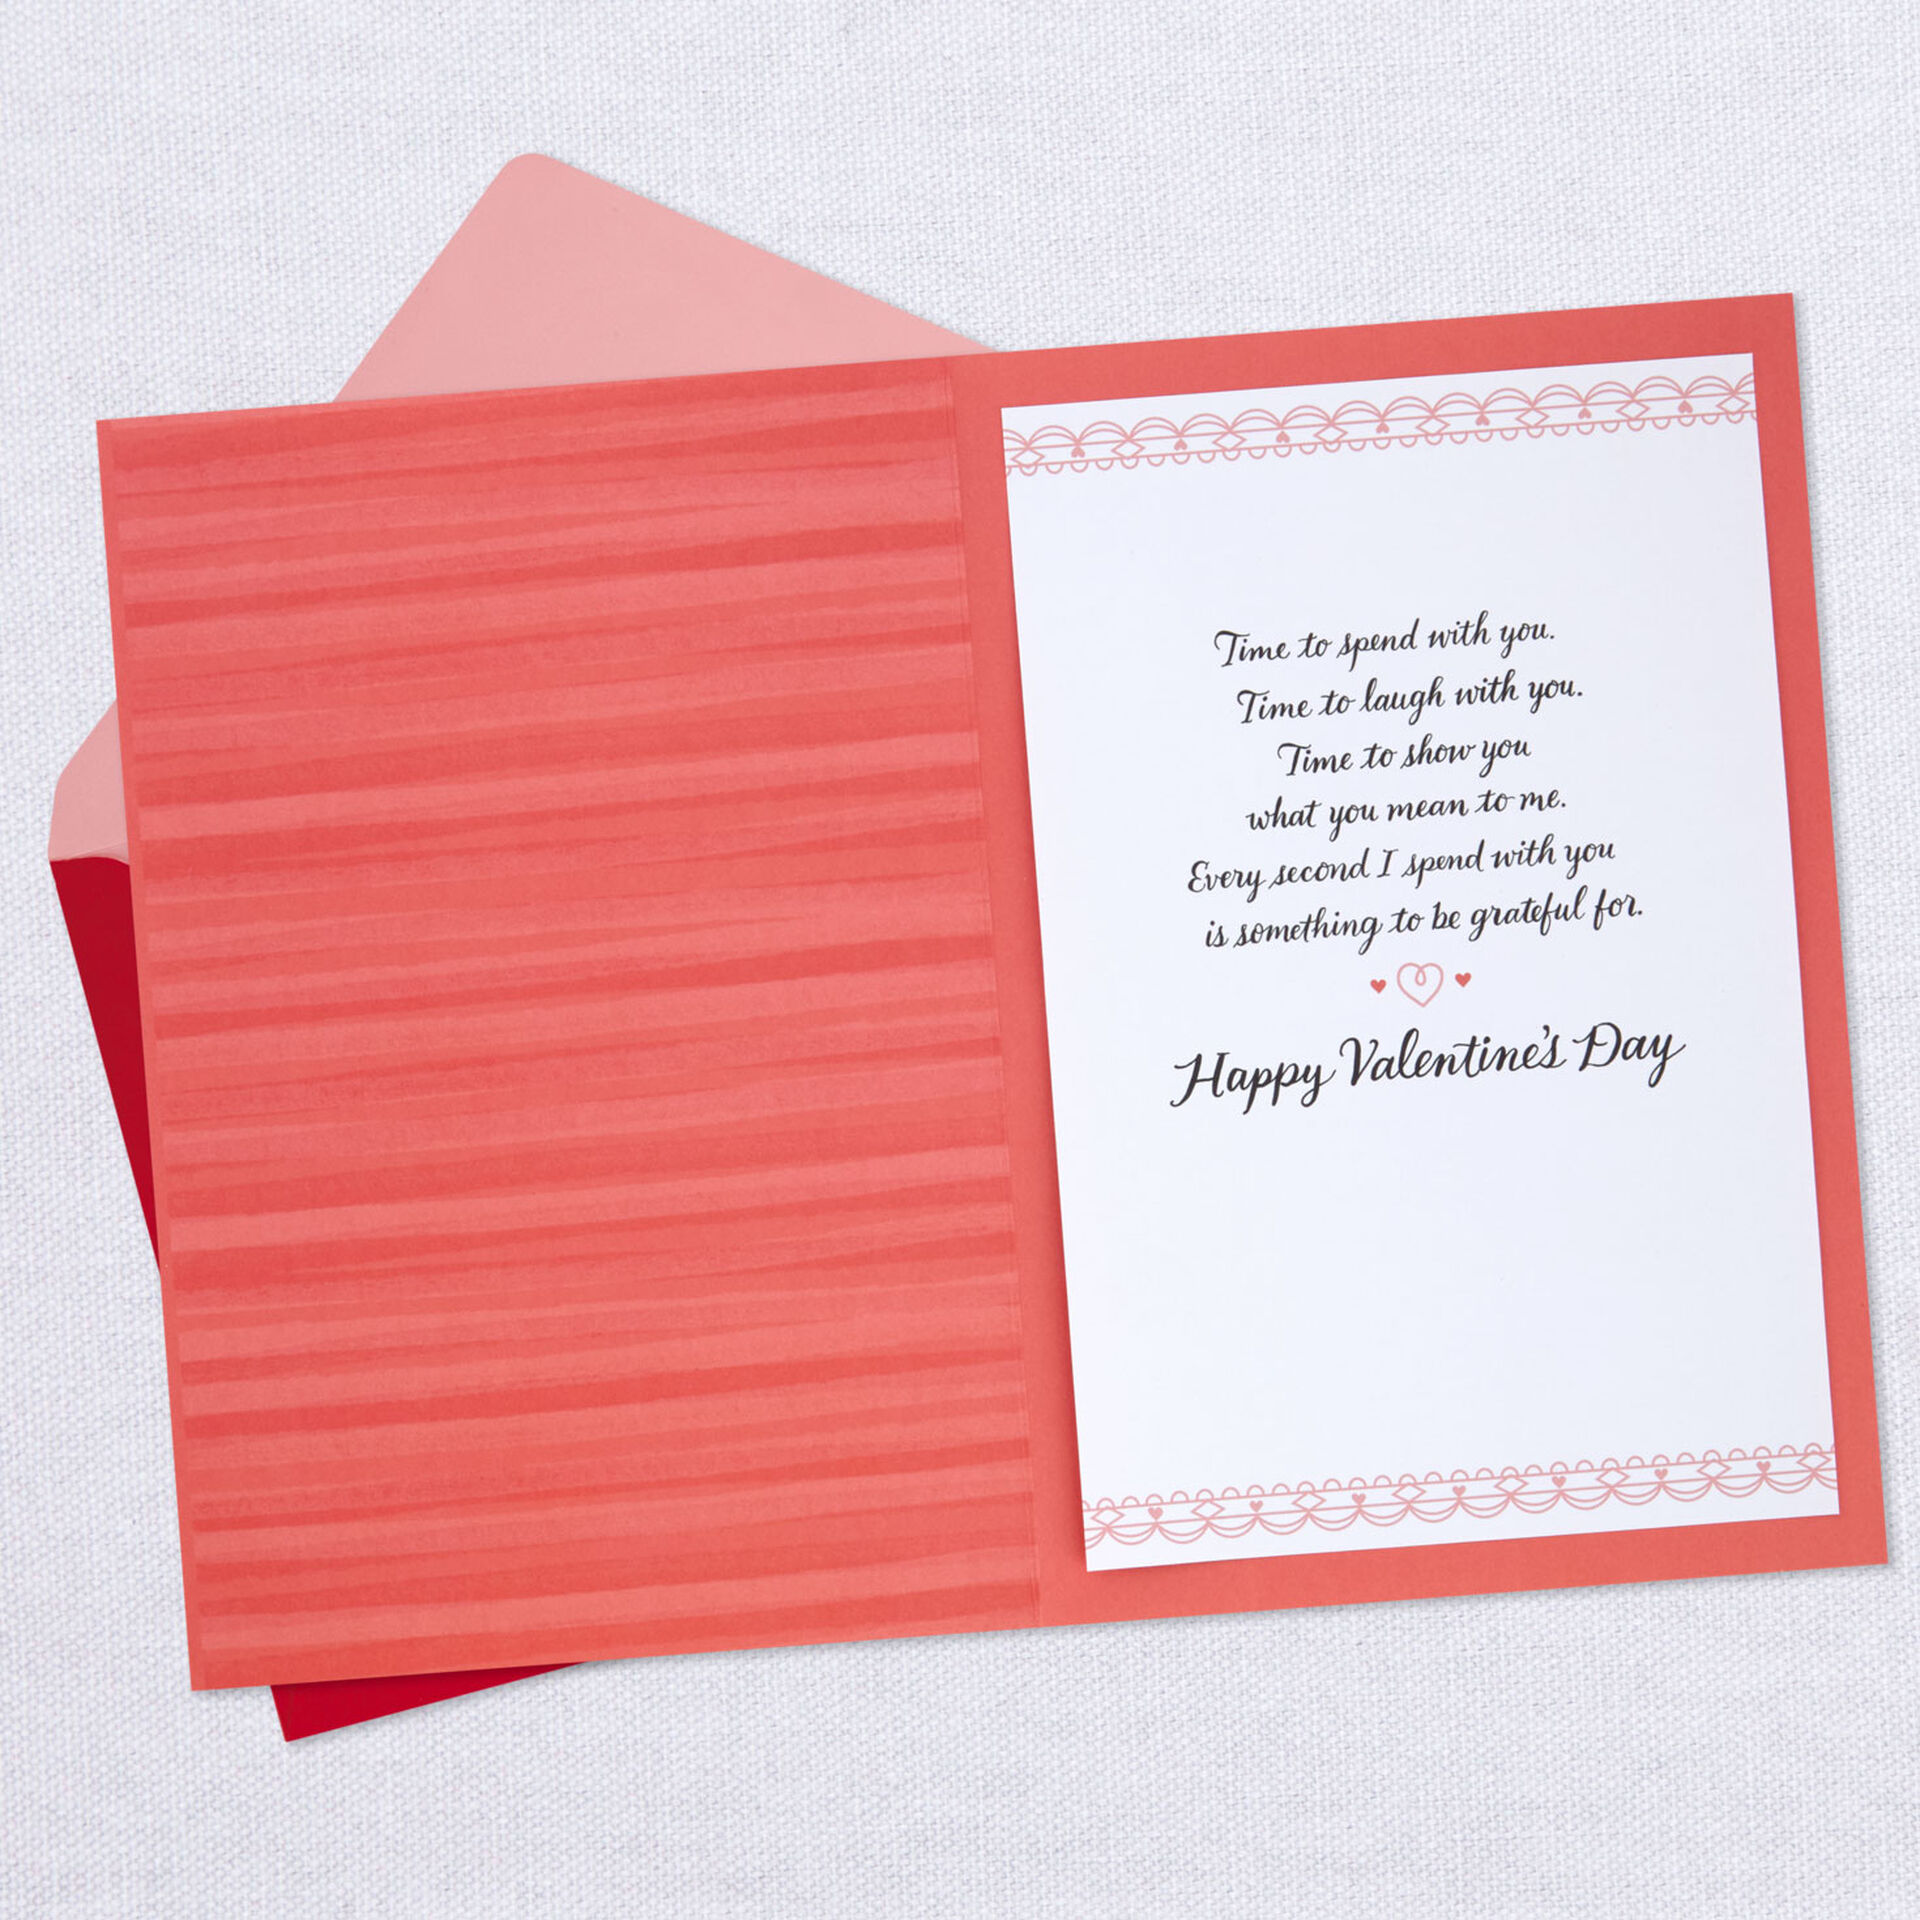 Man-and-Woman-At-Caf-Romantic-Valentines-Day-Card_599SV8084_03